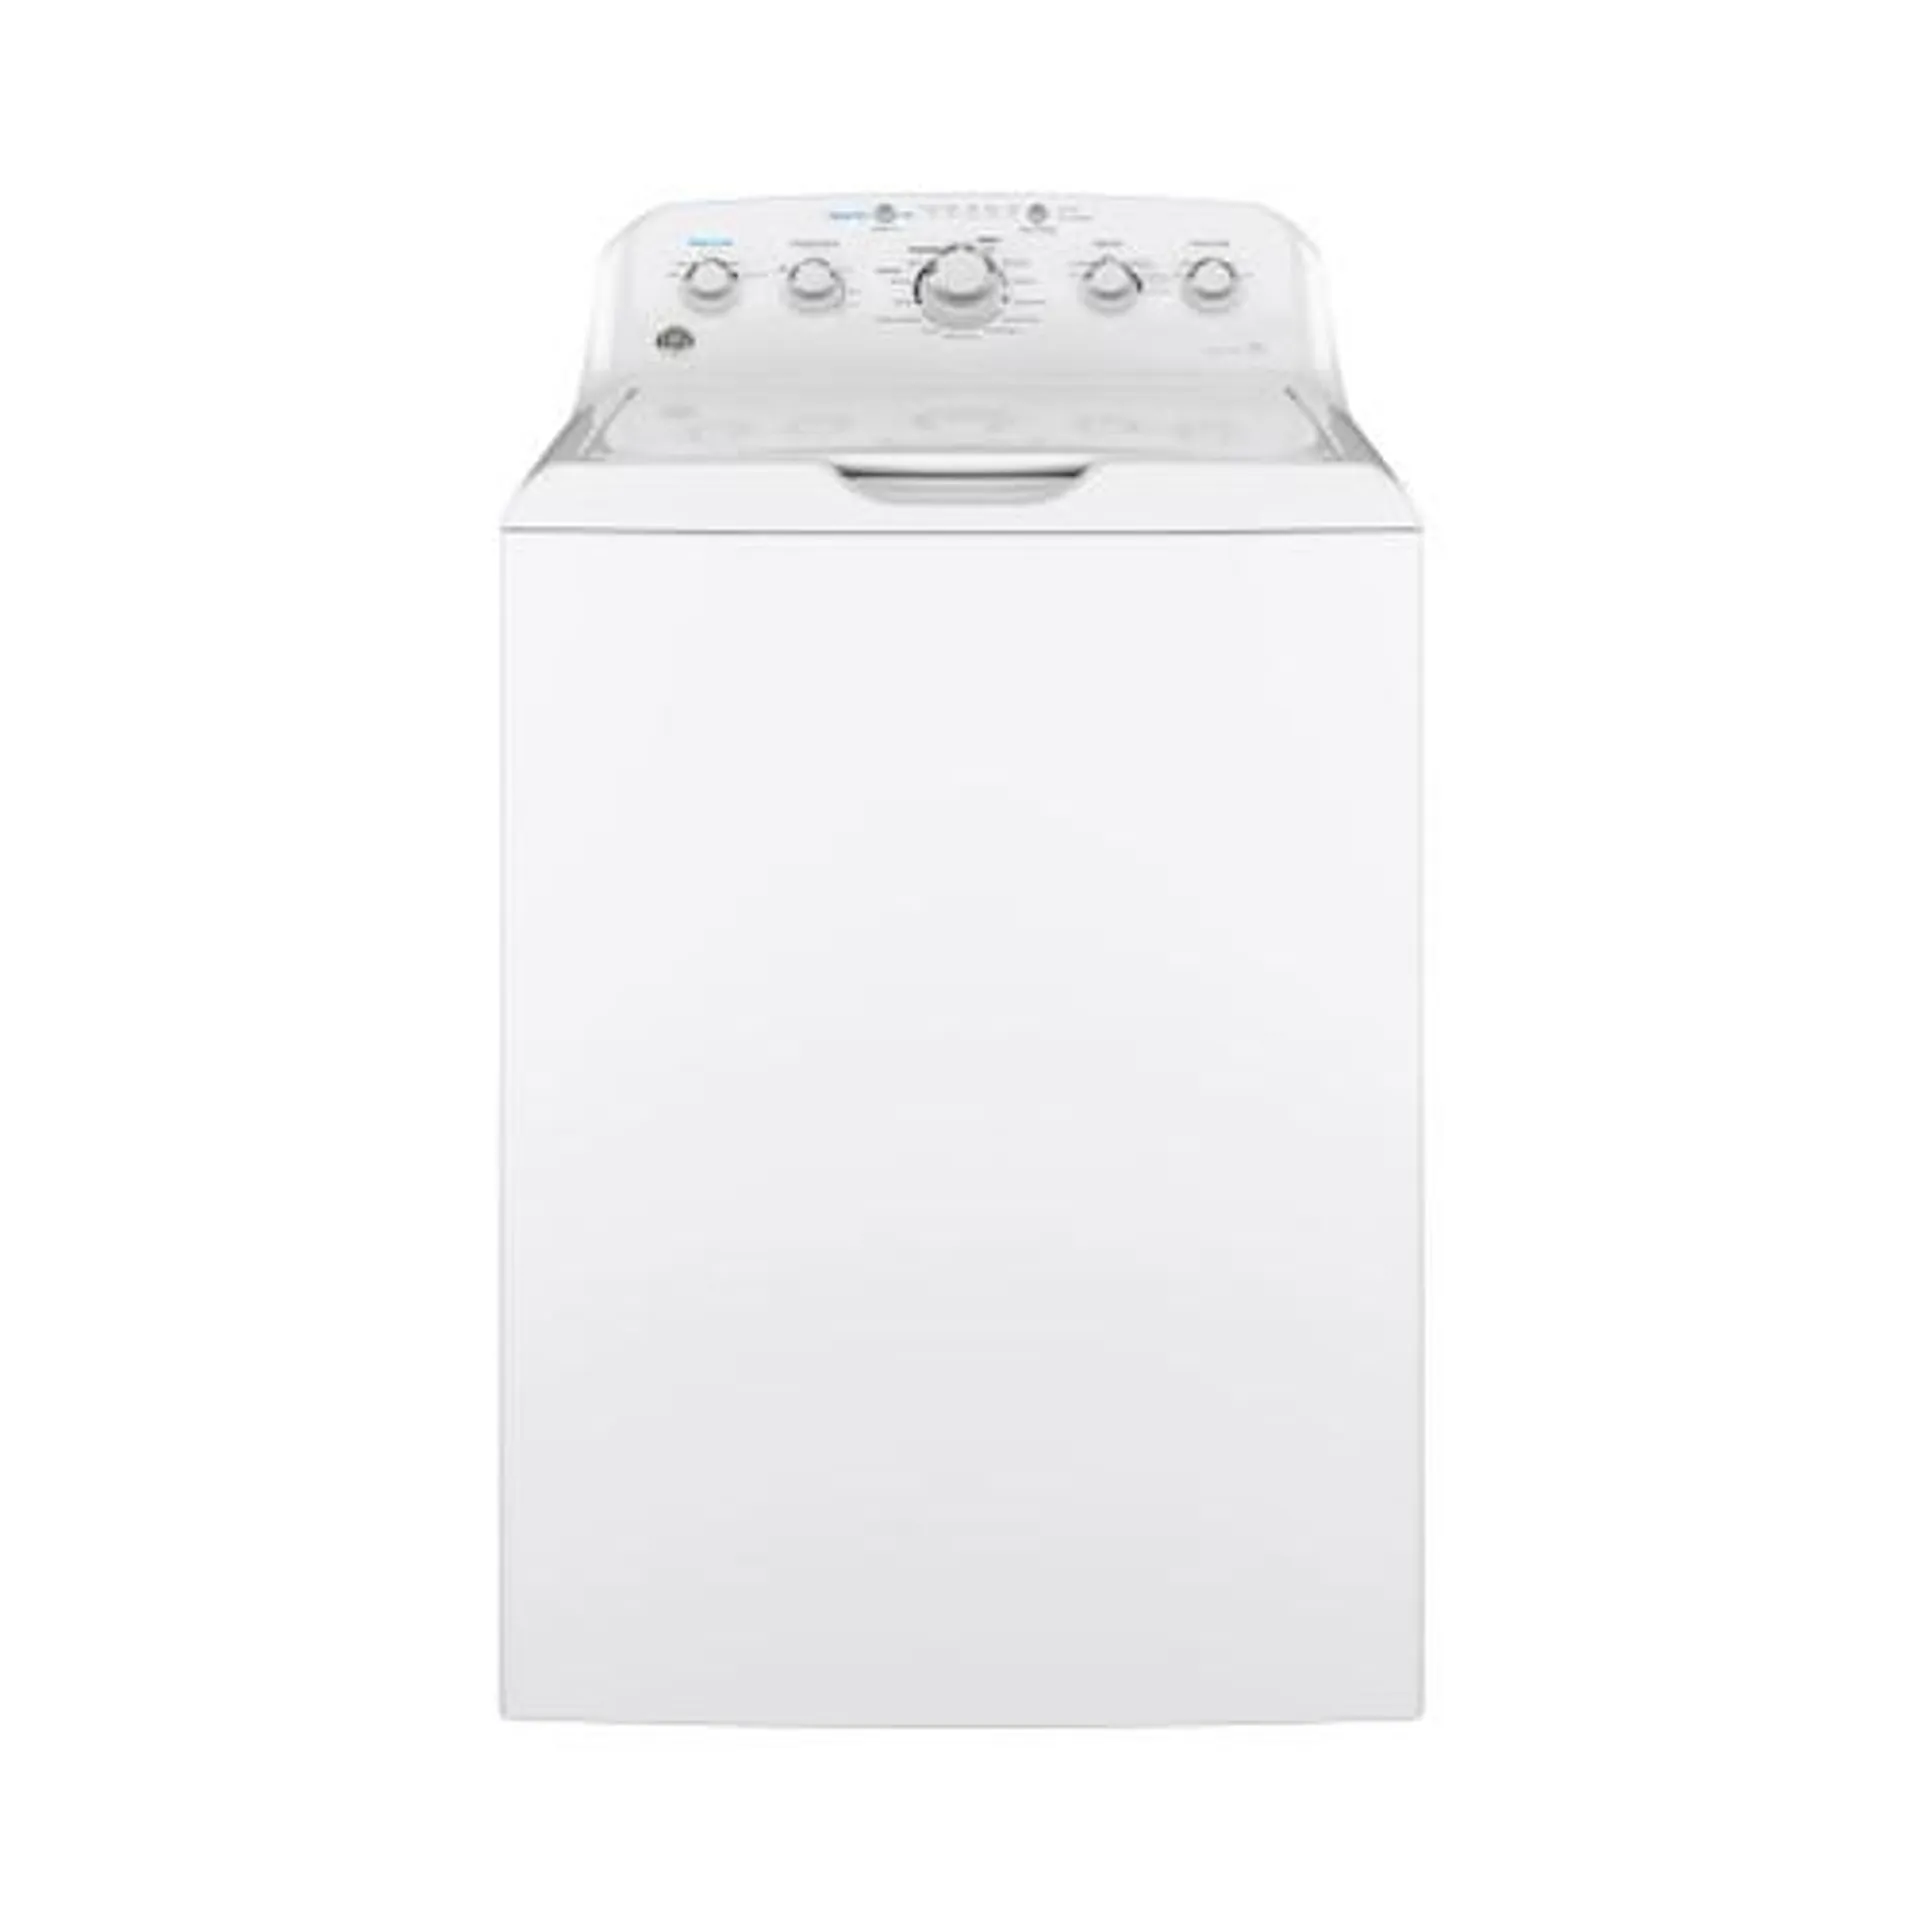 GE® 4.5 Cu. Ft. Capacity Washer with Stainless Steel Basket - GTW465ASNWW